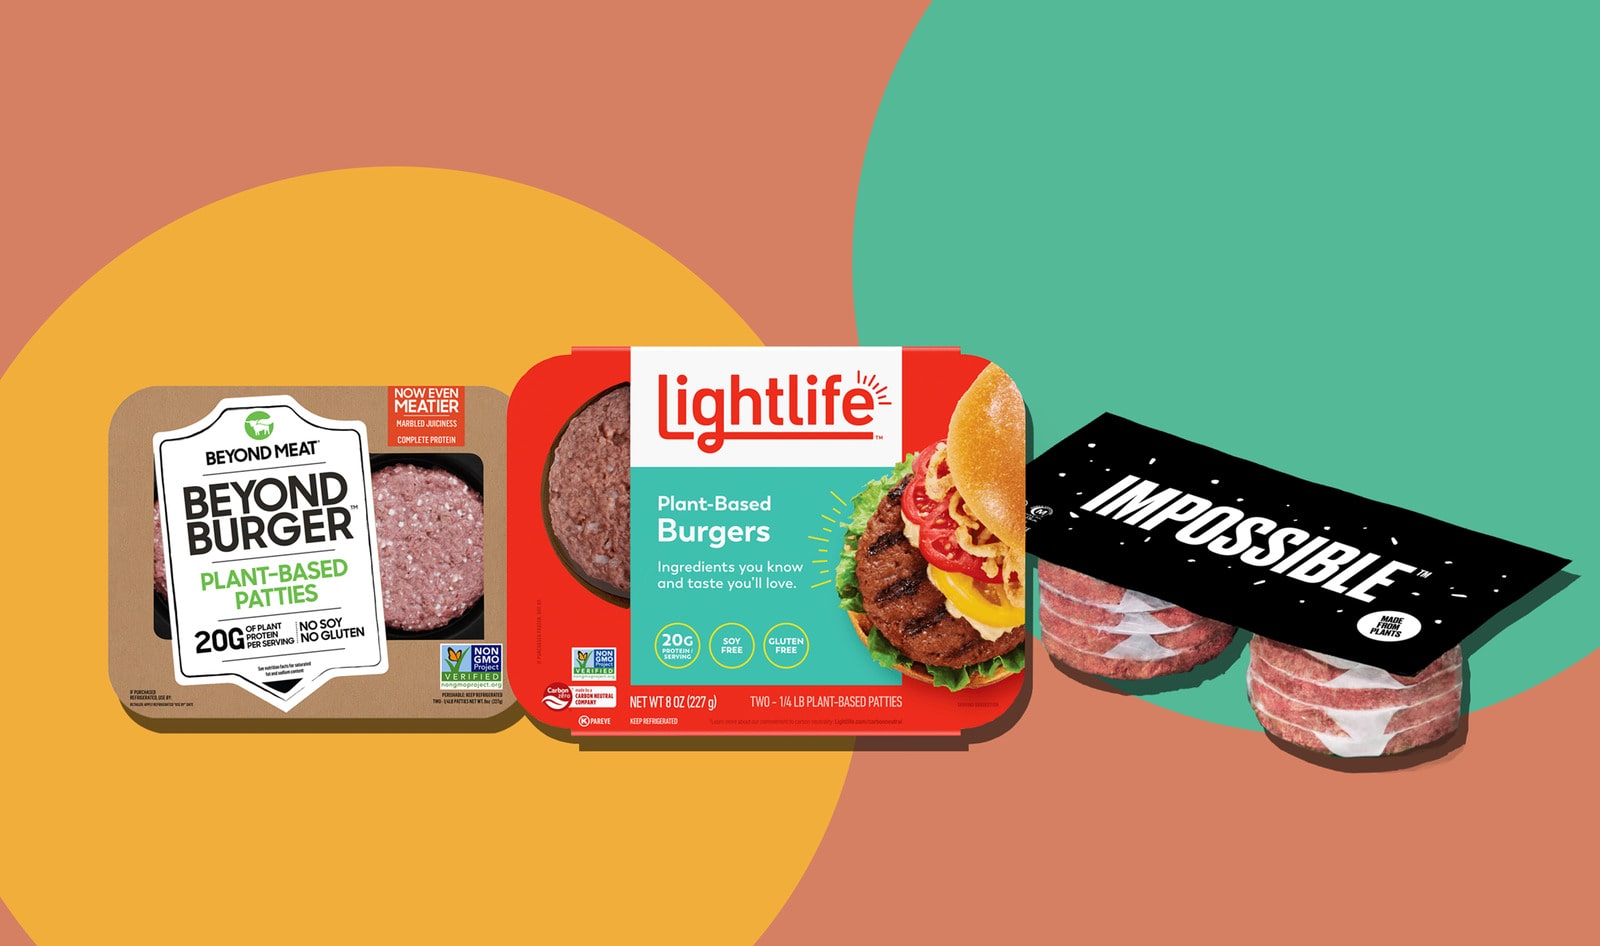 Lightlife Targets Beyond Meat and Impossible Foods in a Full-Page <i>New York Times</i> Ad. Here's Their Response.